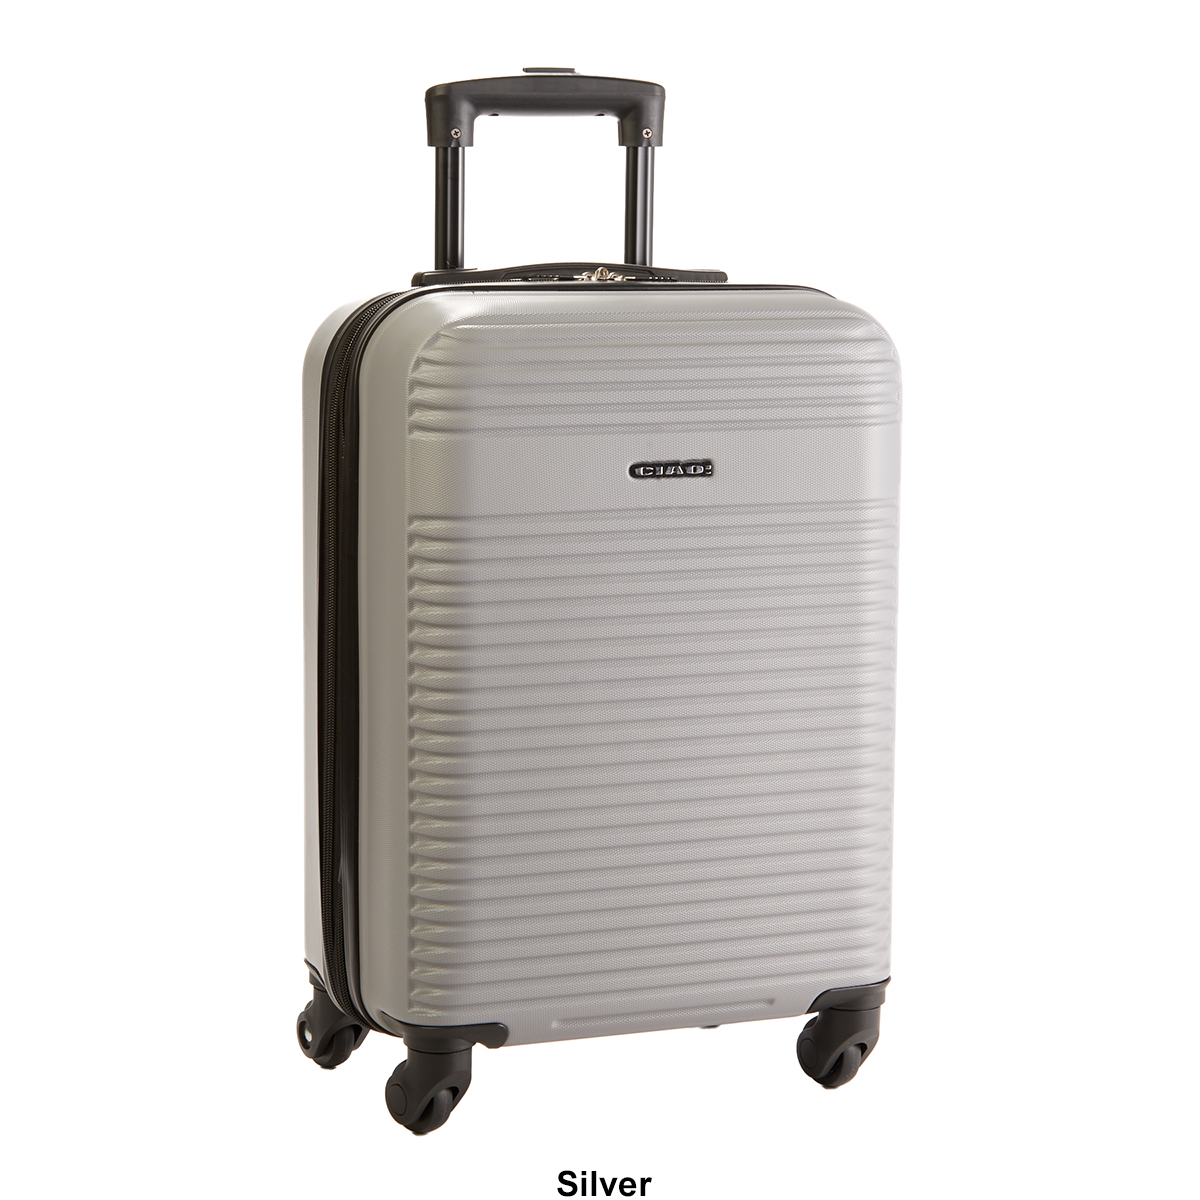 Ciao 20in. Carry-On Hardside Spinner Luggage